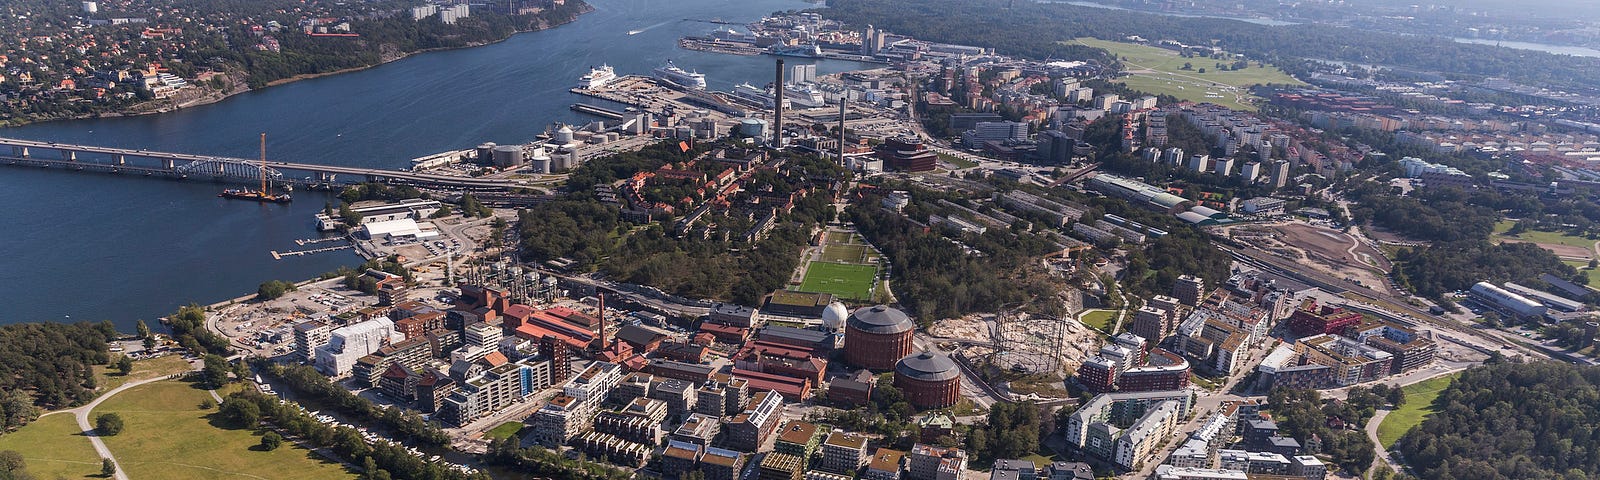 An aerial view of the Royal Seaport development in Stockholm, looking south.